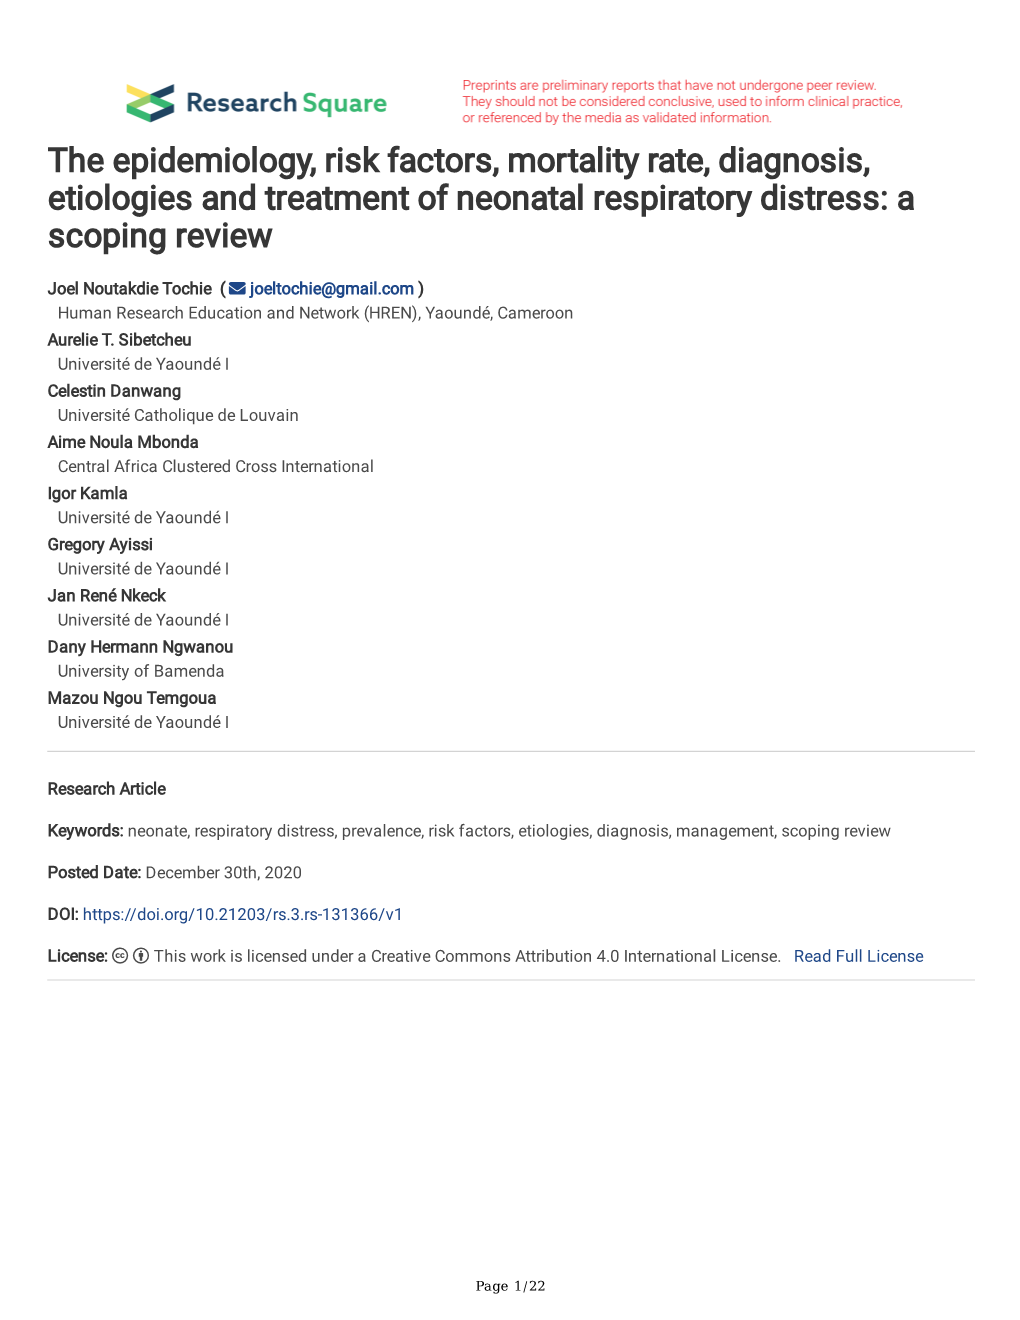 The Epidemiology, Risk Factors, Mortality Rate, Diagnosis, Etiologies and Treatment of Neonatal Respiratory Distress: a Scoping Review